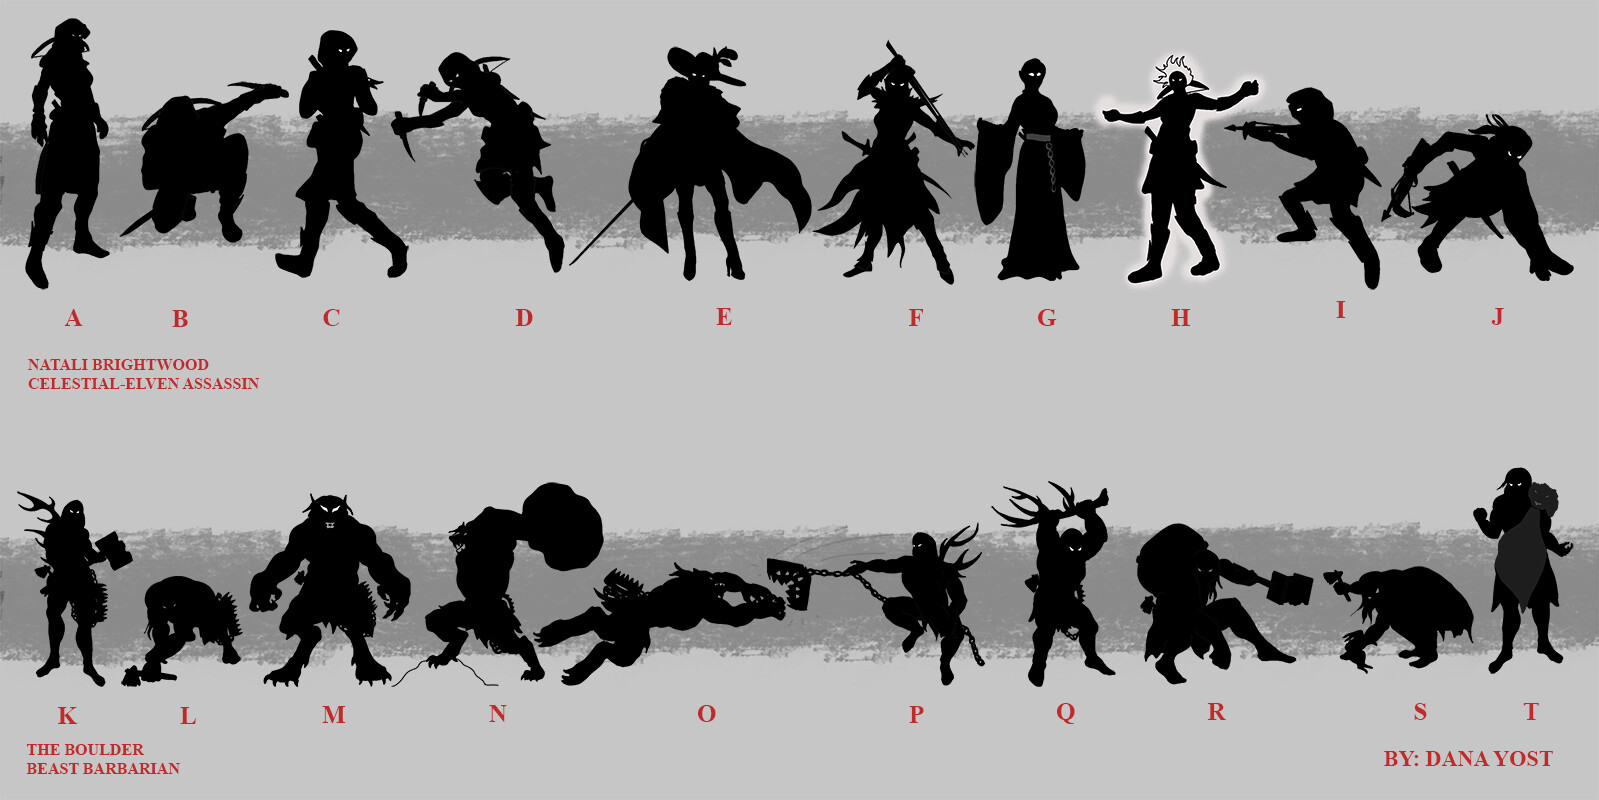 These are concept art silhouettes to figure out good form ideas for character designs. These are for two characters; one female assassin, and one male barbarian.